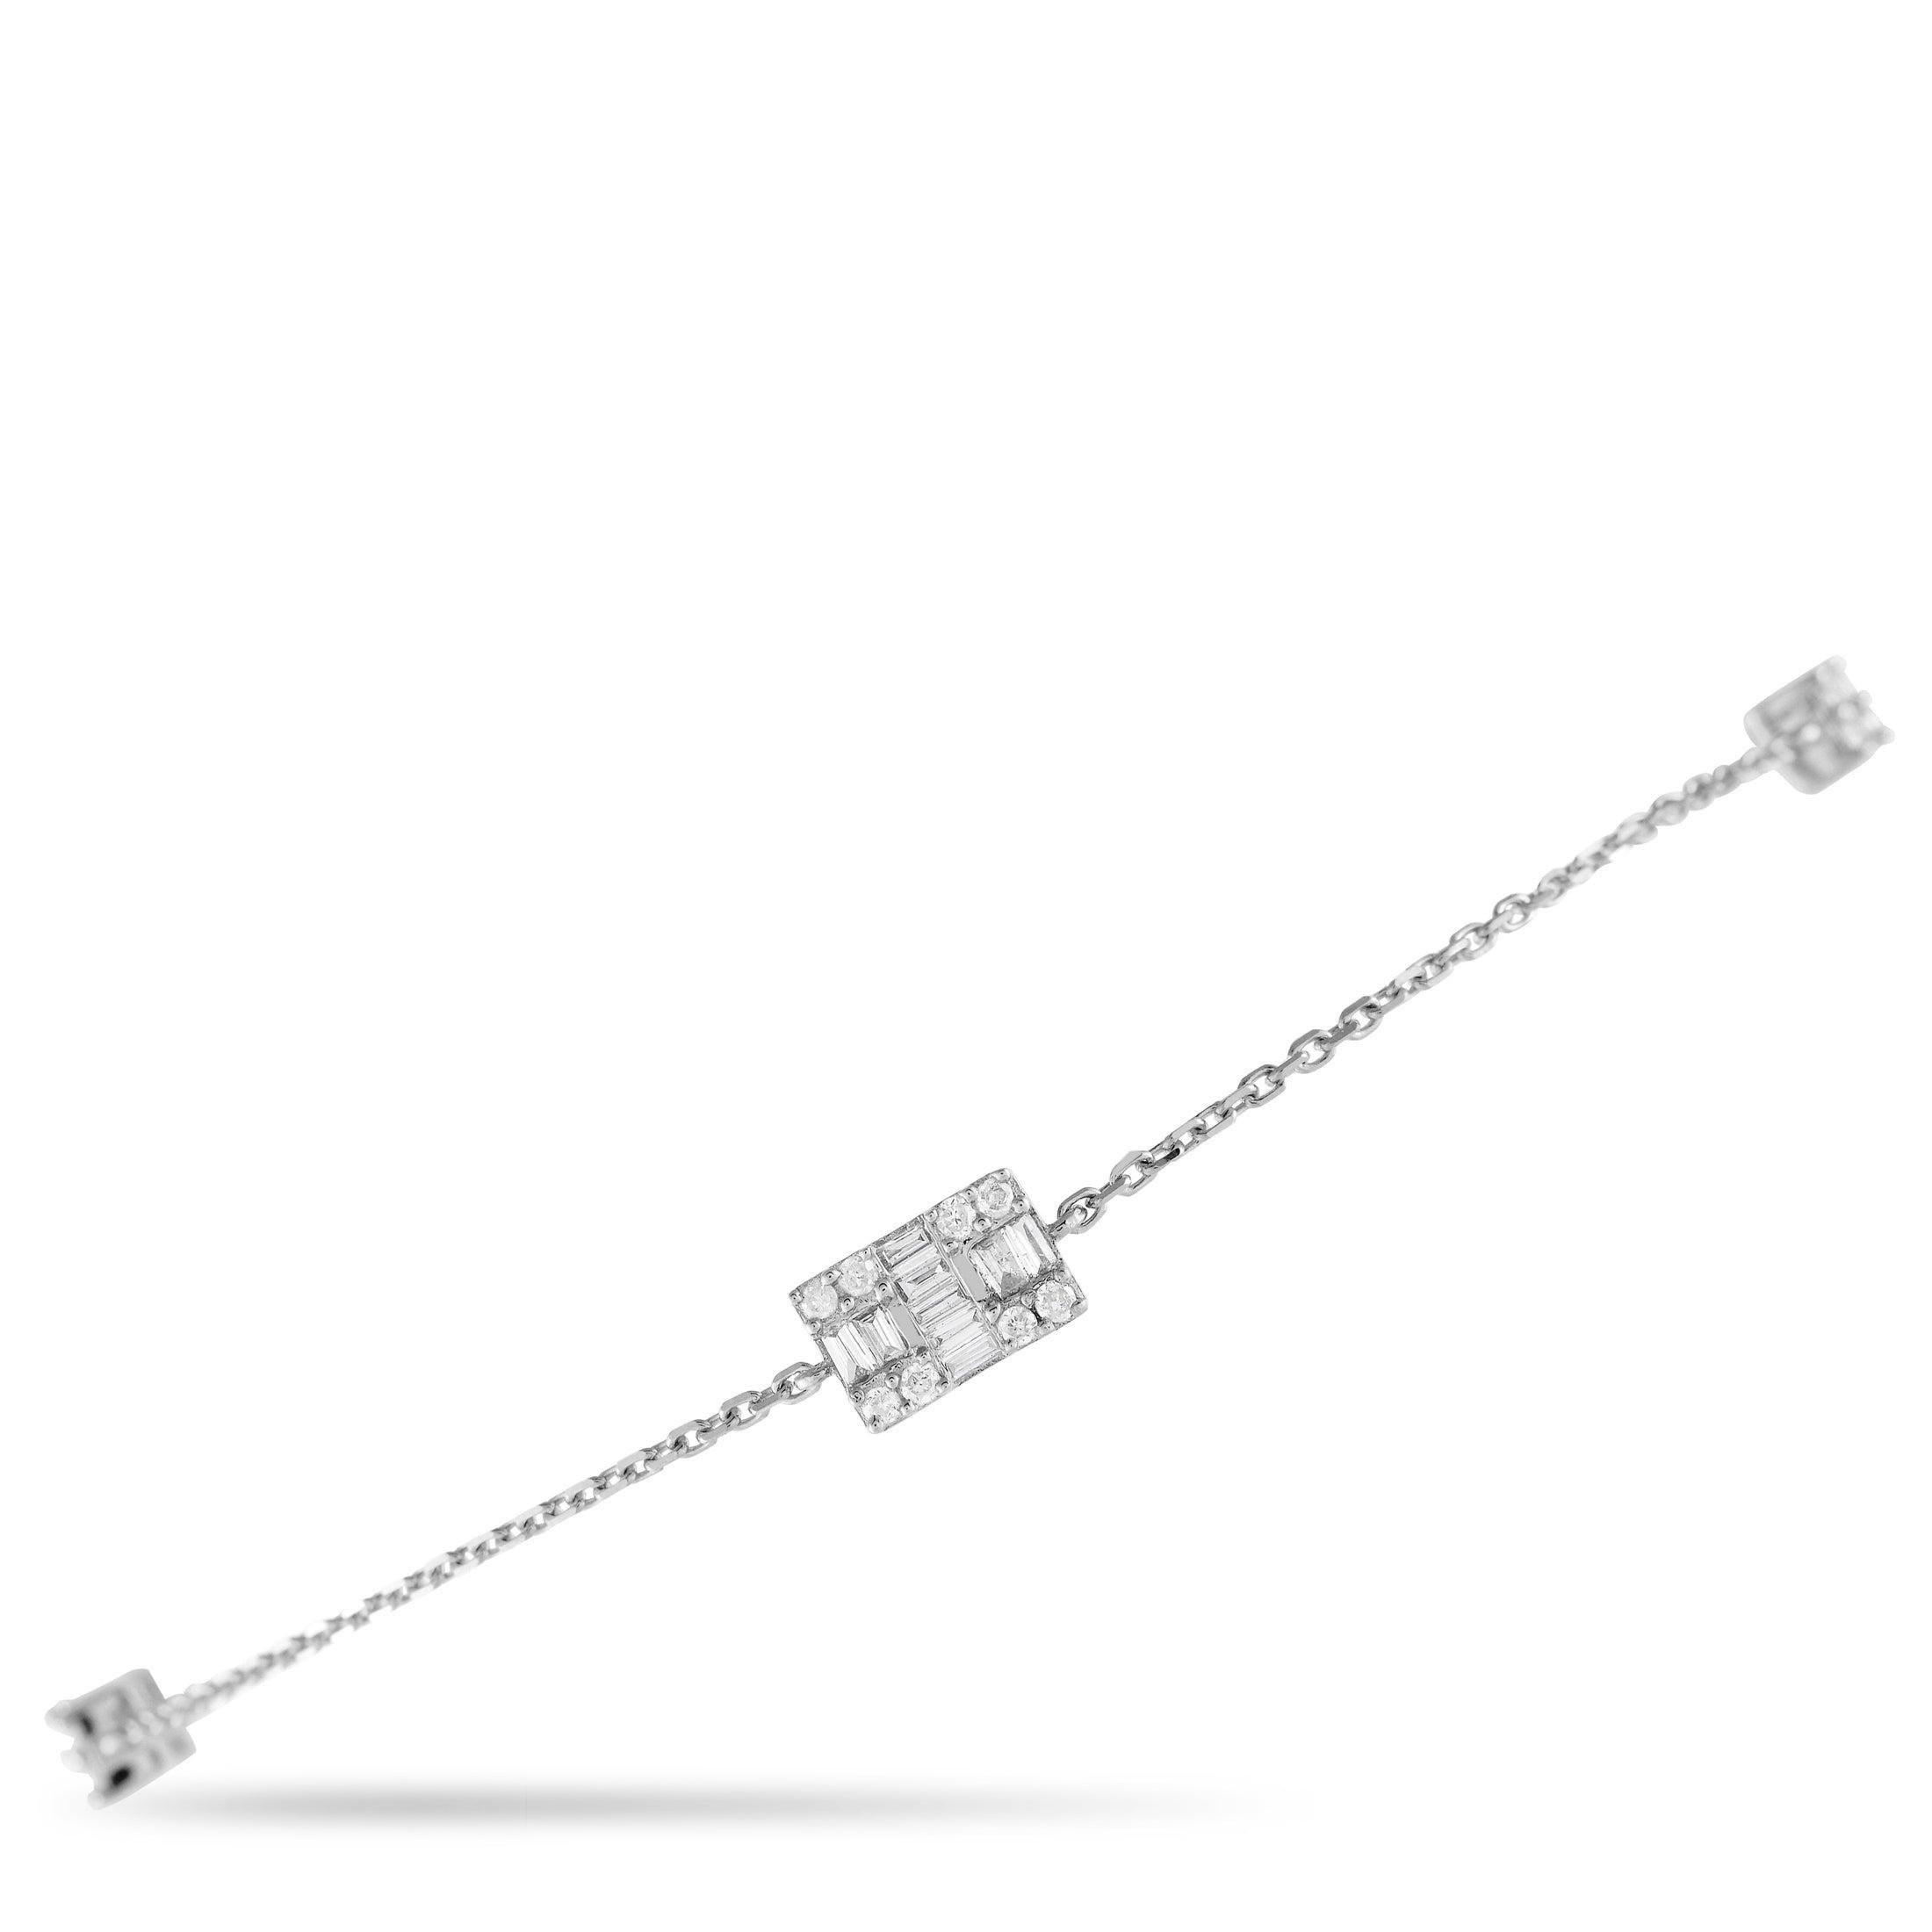 LB Exclusive 14K White Gold 0.25ct Diamond Station Bracelet BR09825-W by NON BRANDED